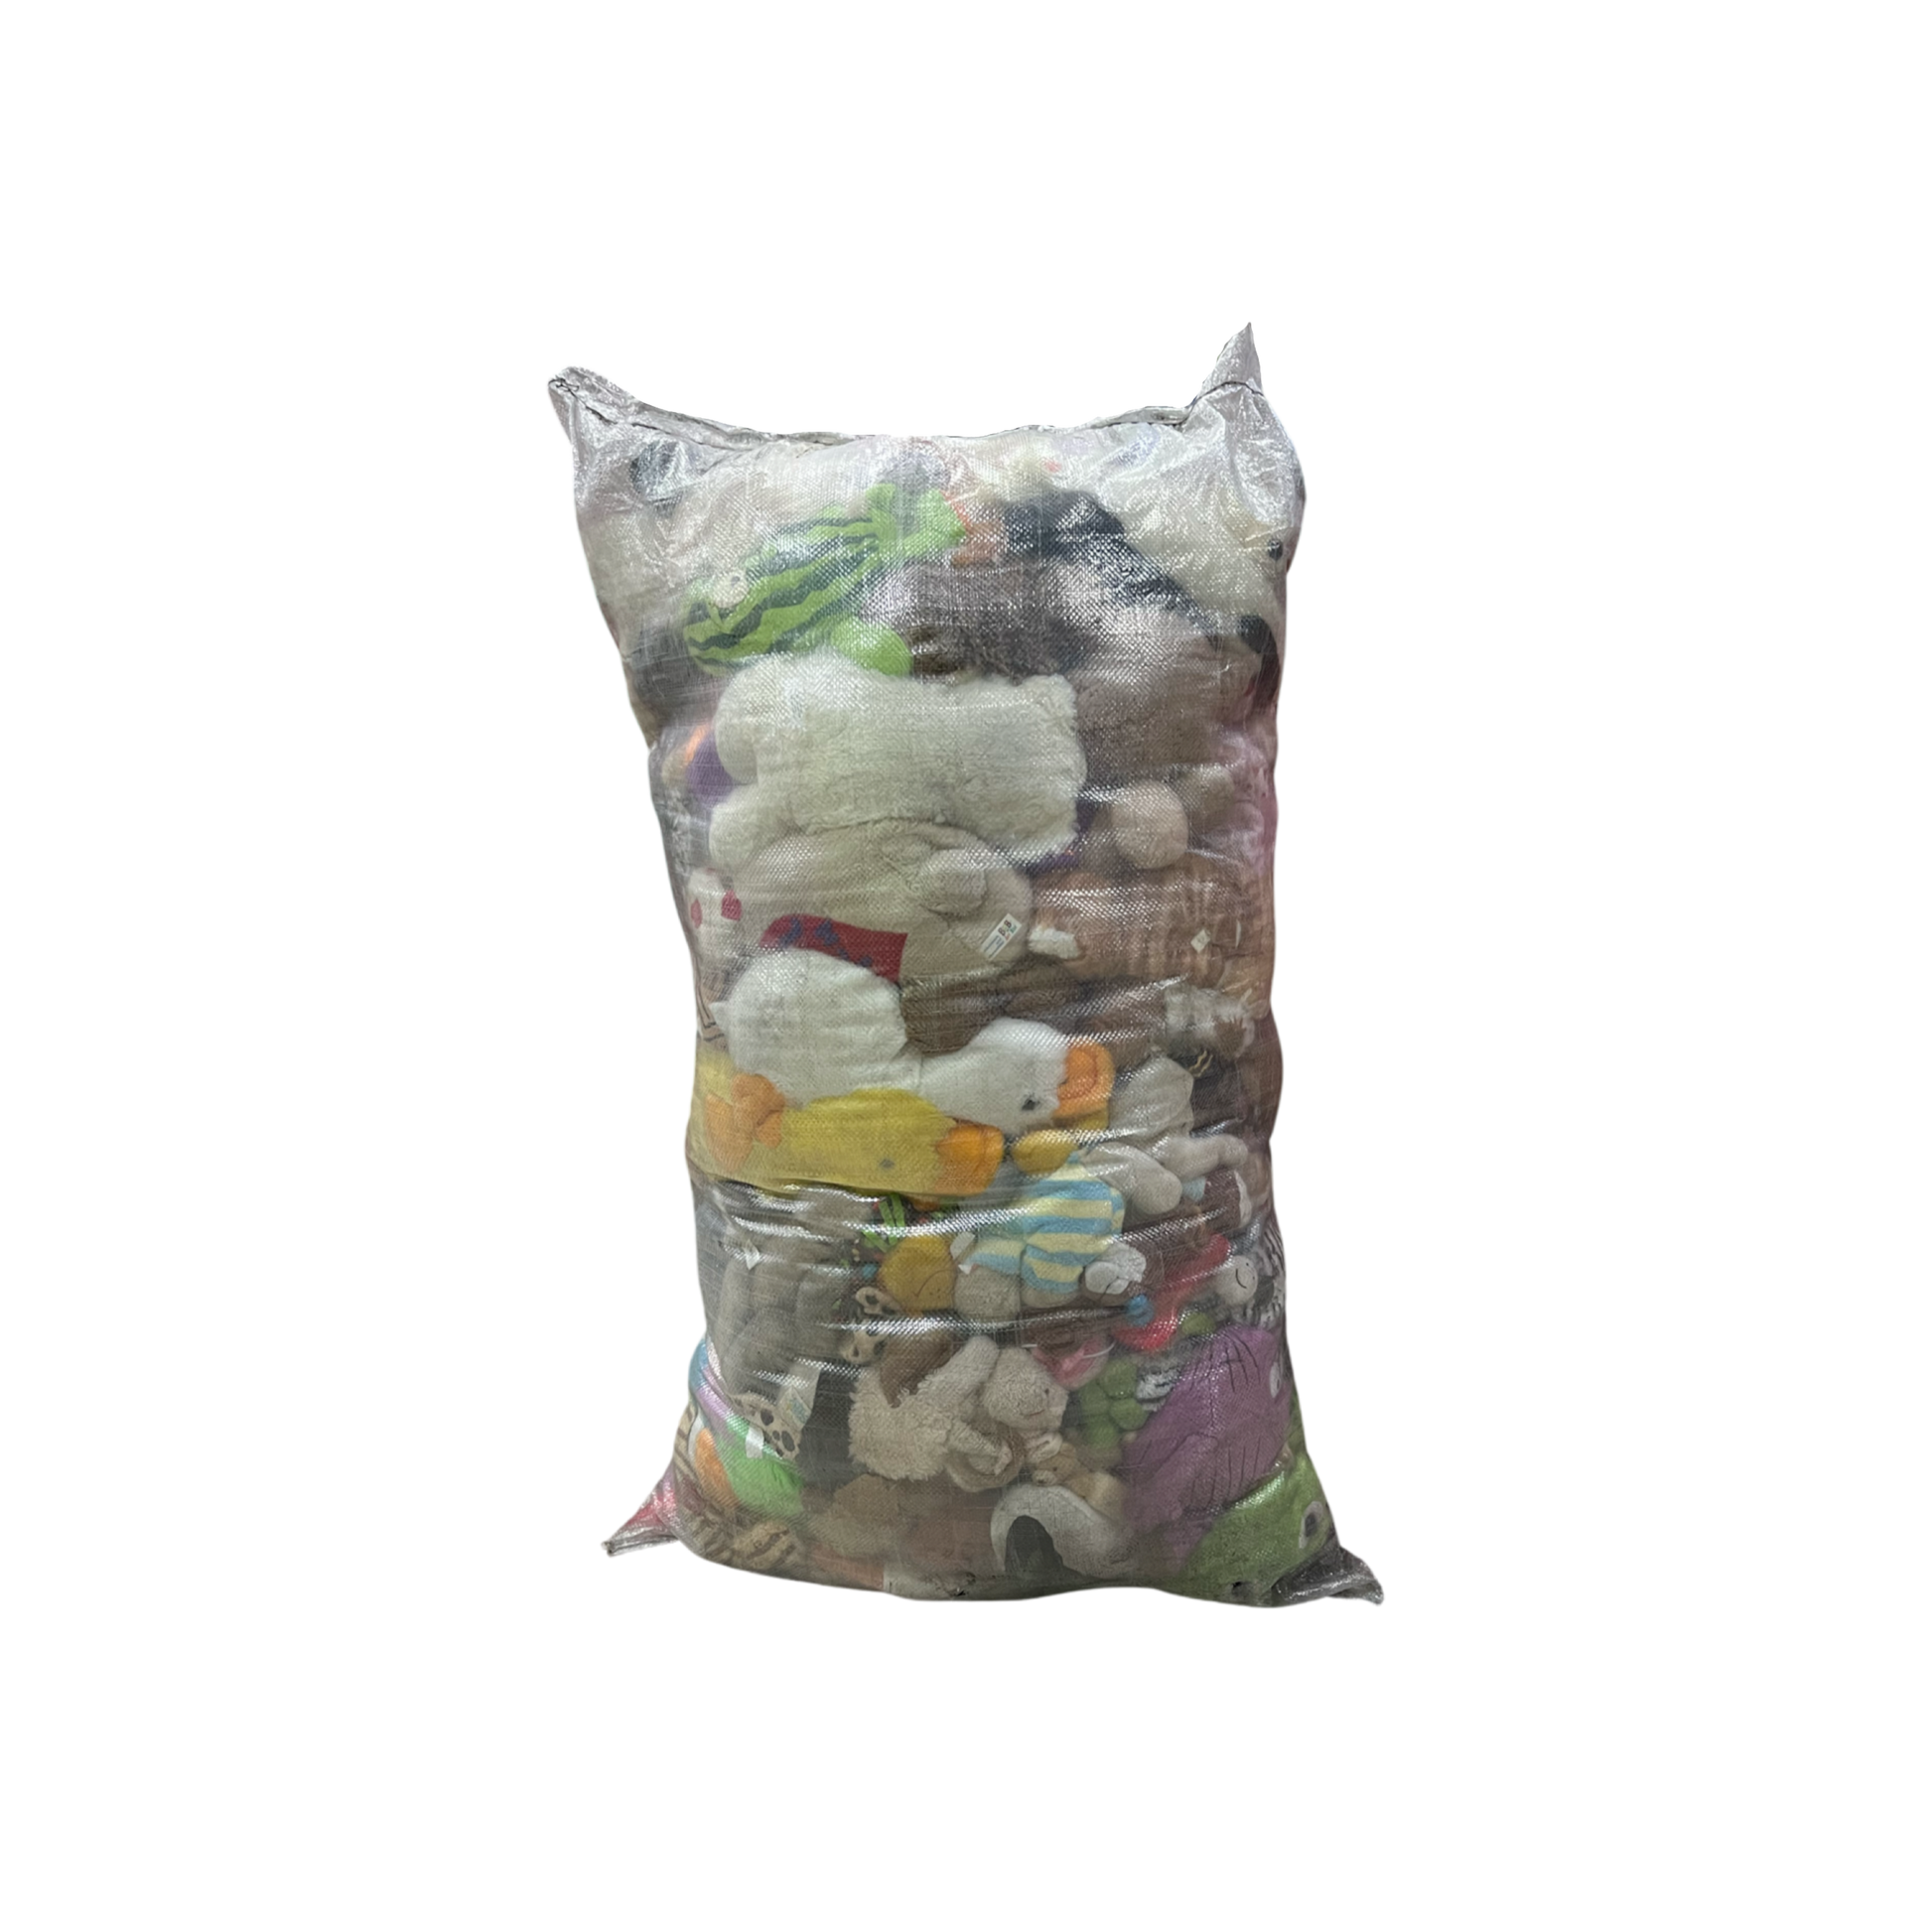 20kg Soft Toy Bale Wholesale | The ToyBox